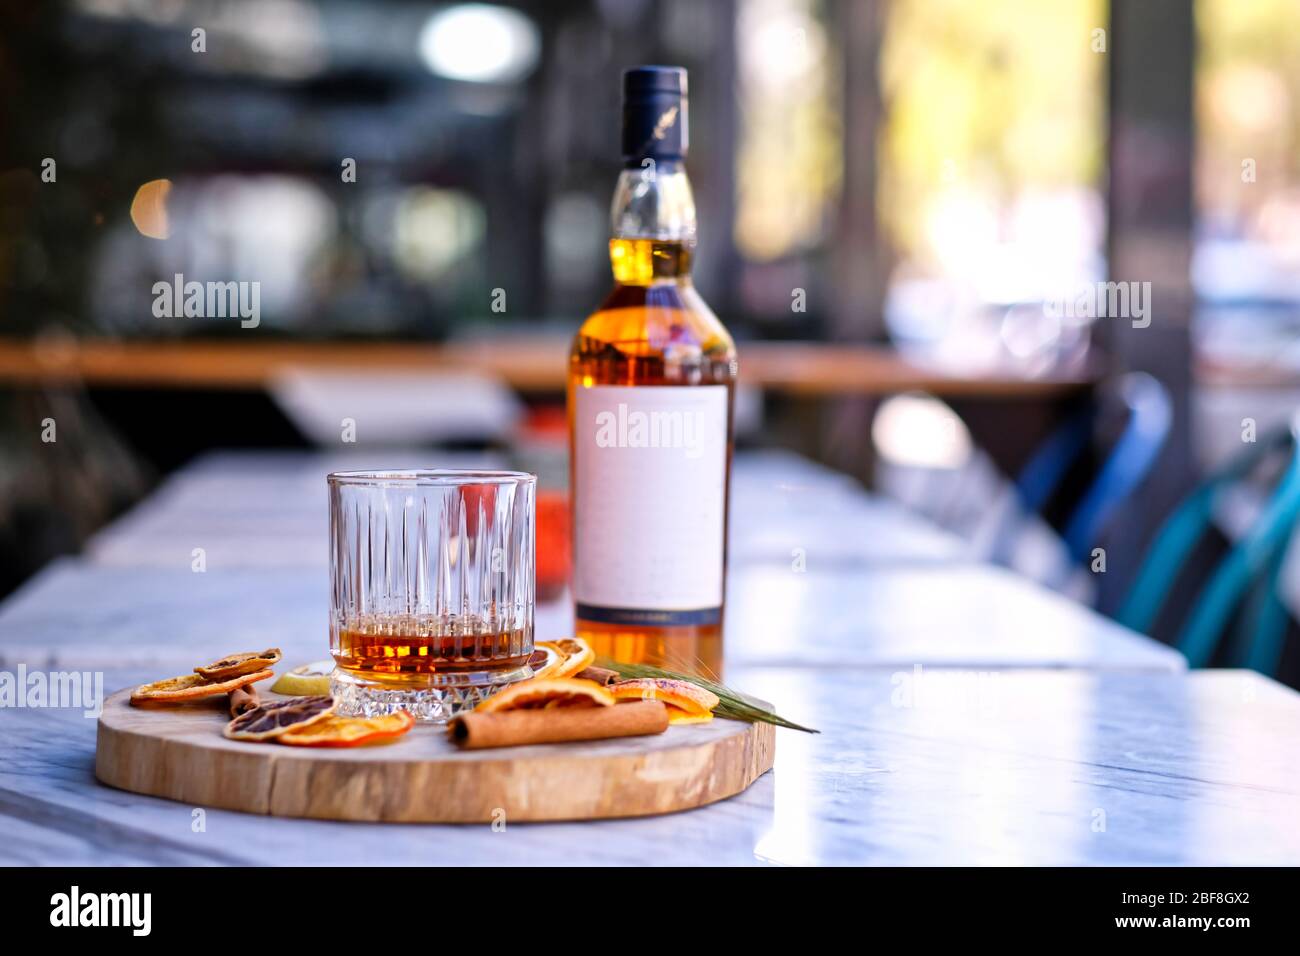 A bottle of whiskey. Drink a glass of whiskey alcohol on the presentation board Stock Photo